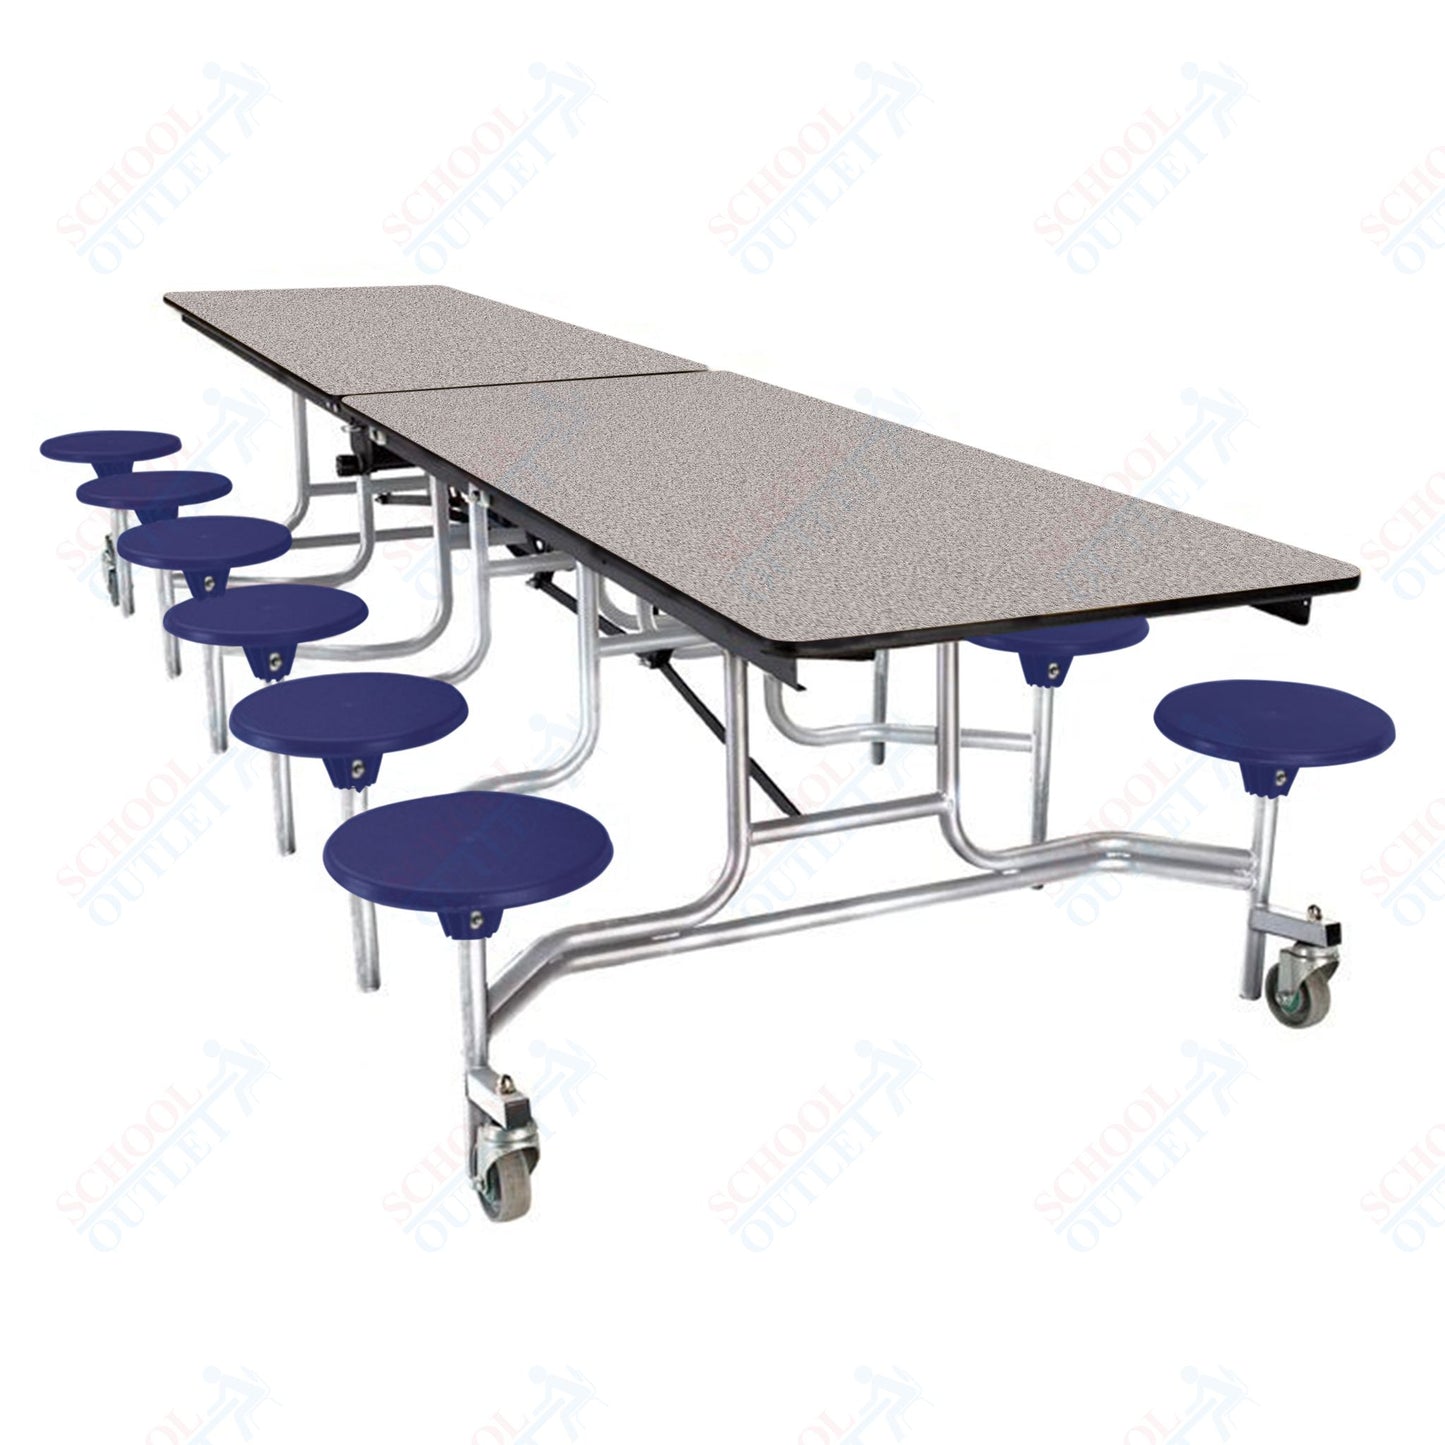 NPS Mobile Cafeteria Table - 30" W x 10' L - 12 Stools - MDF Core - Protect Edge - Chrome Frame